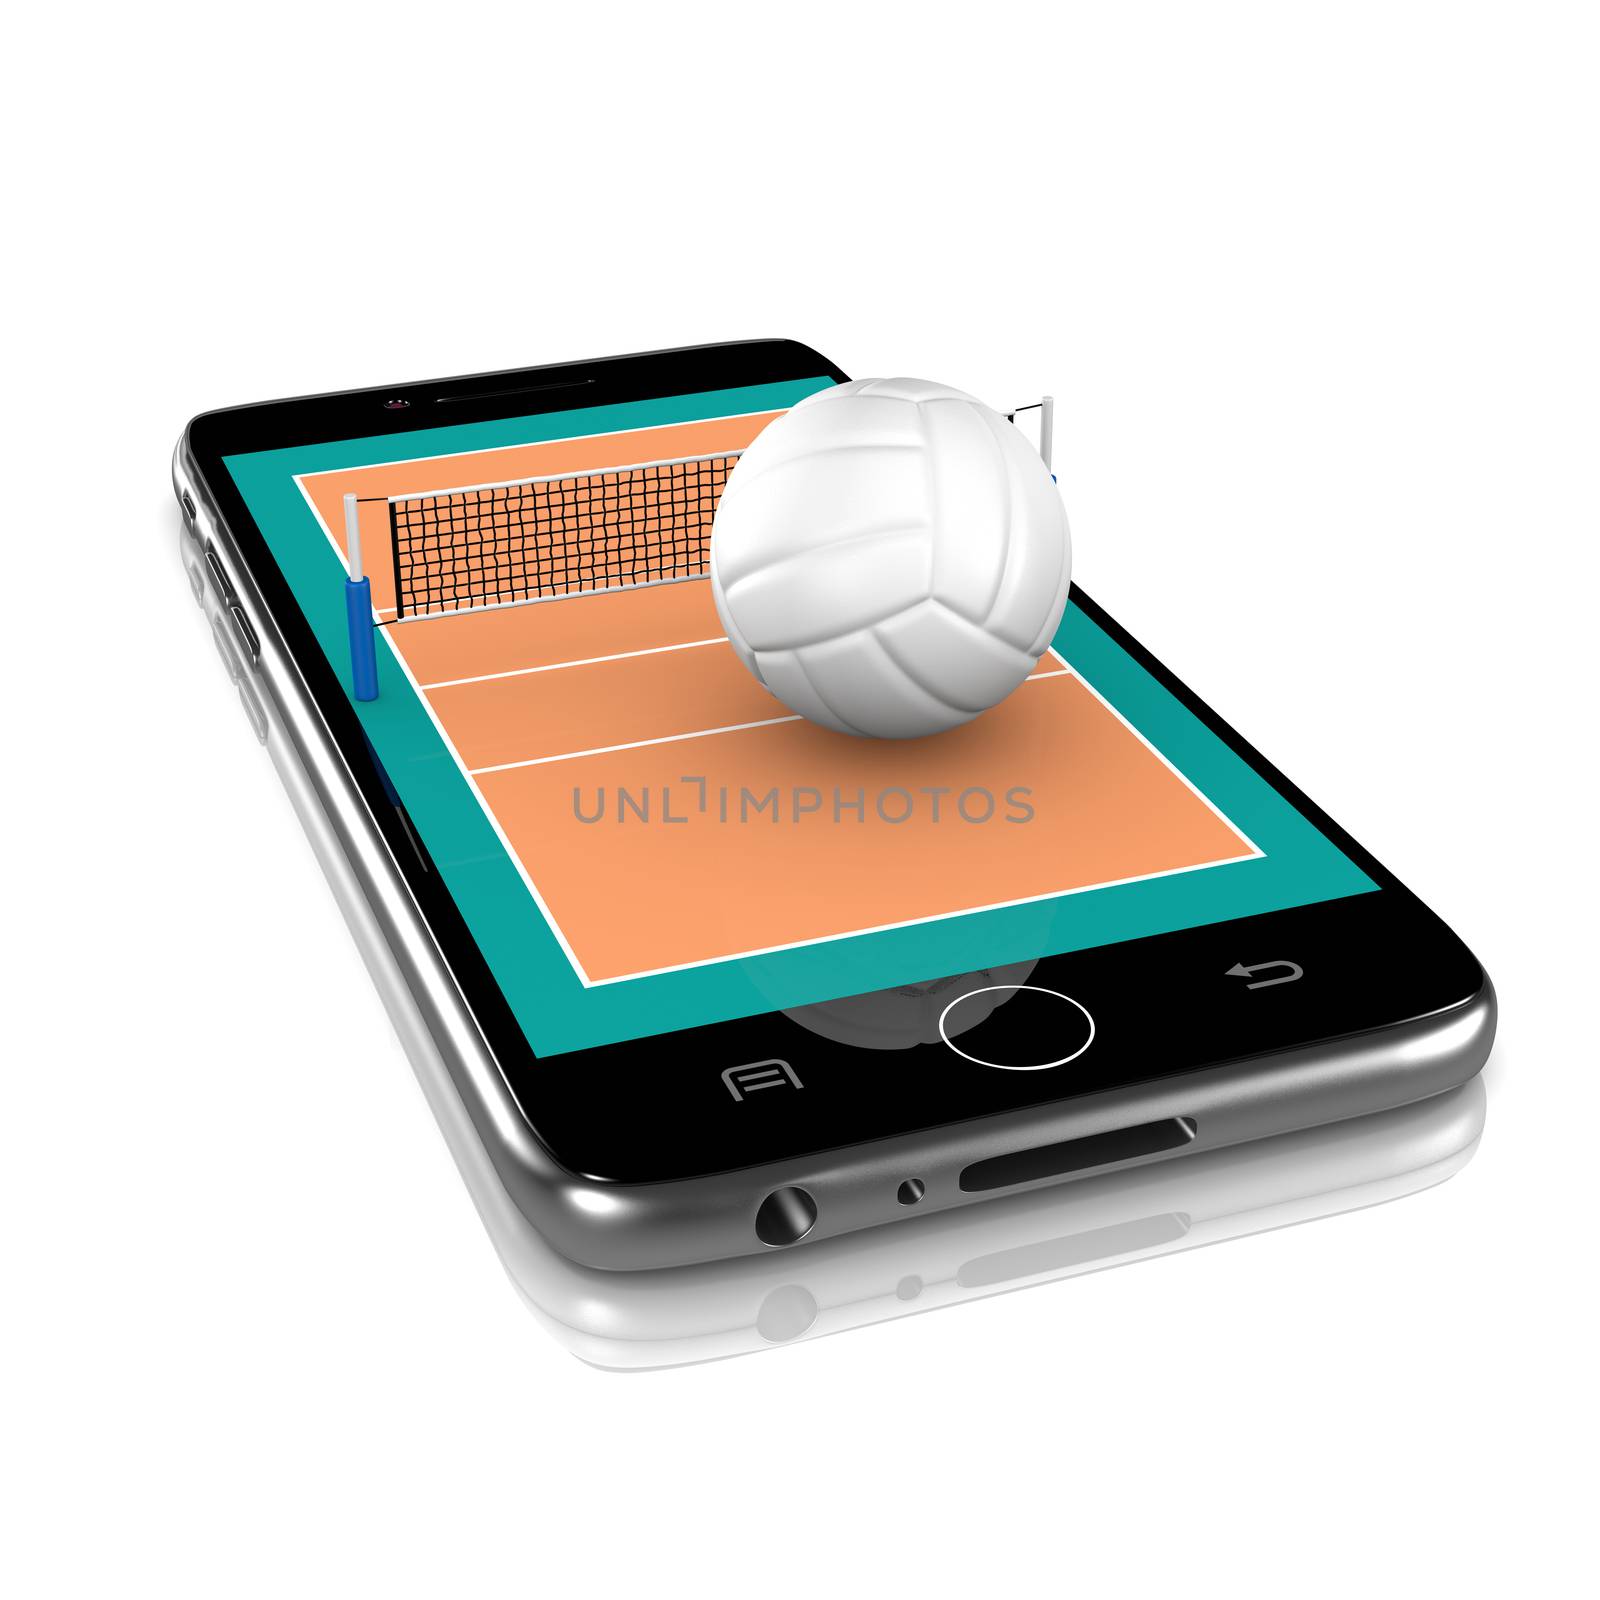 Volleyball Field with Ball and Net on Smartphone Display 3D Illustration Isolated on White Background